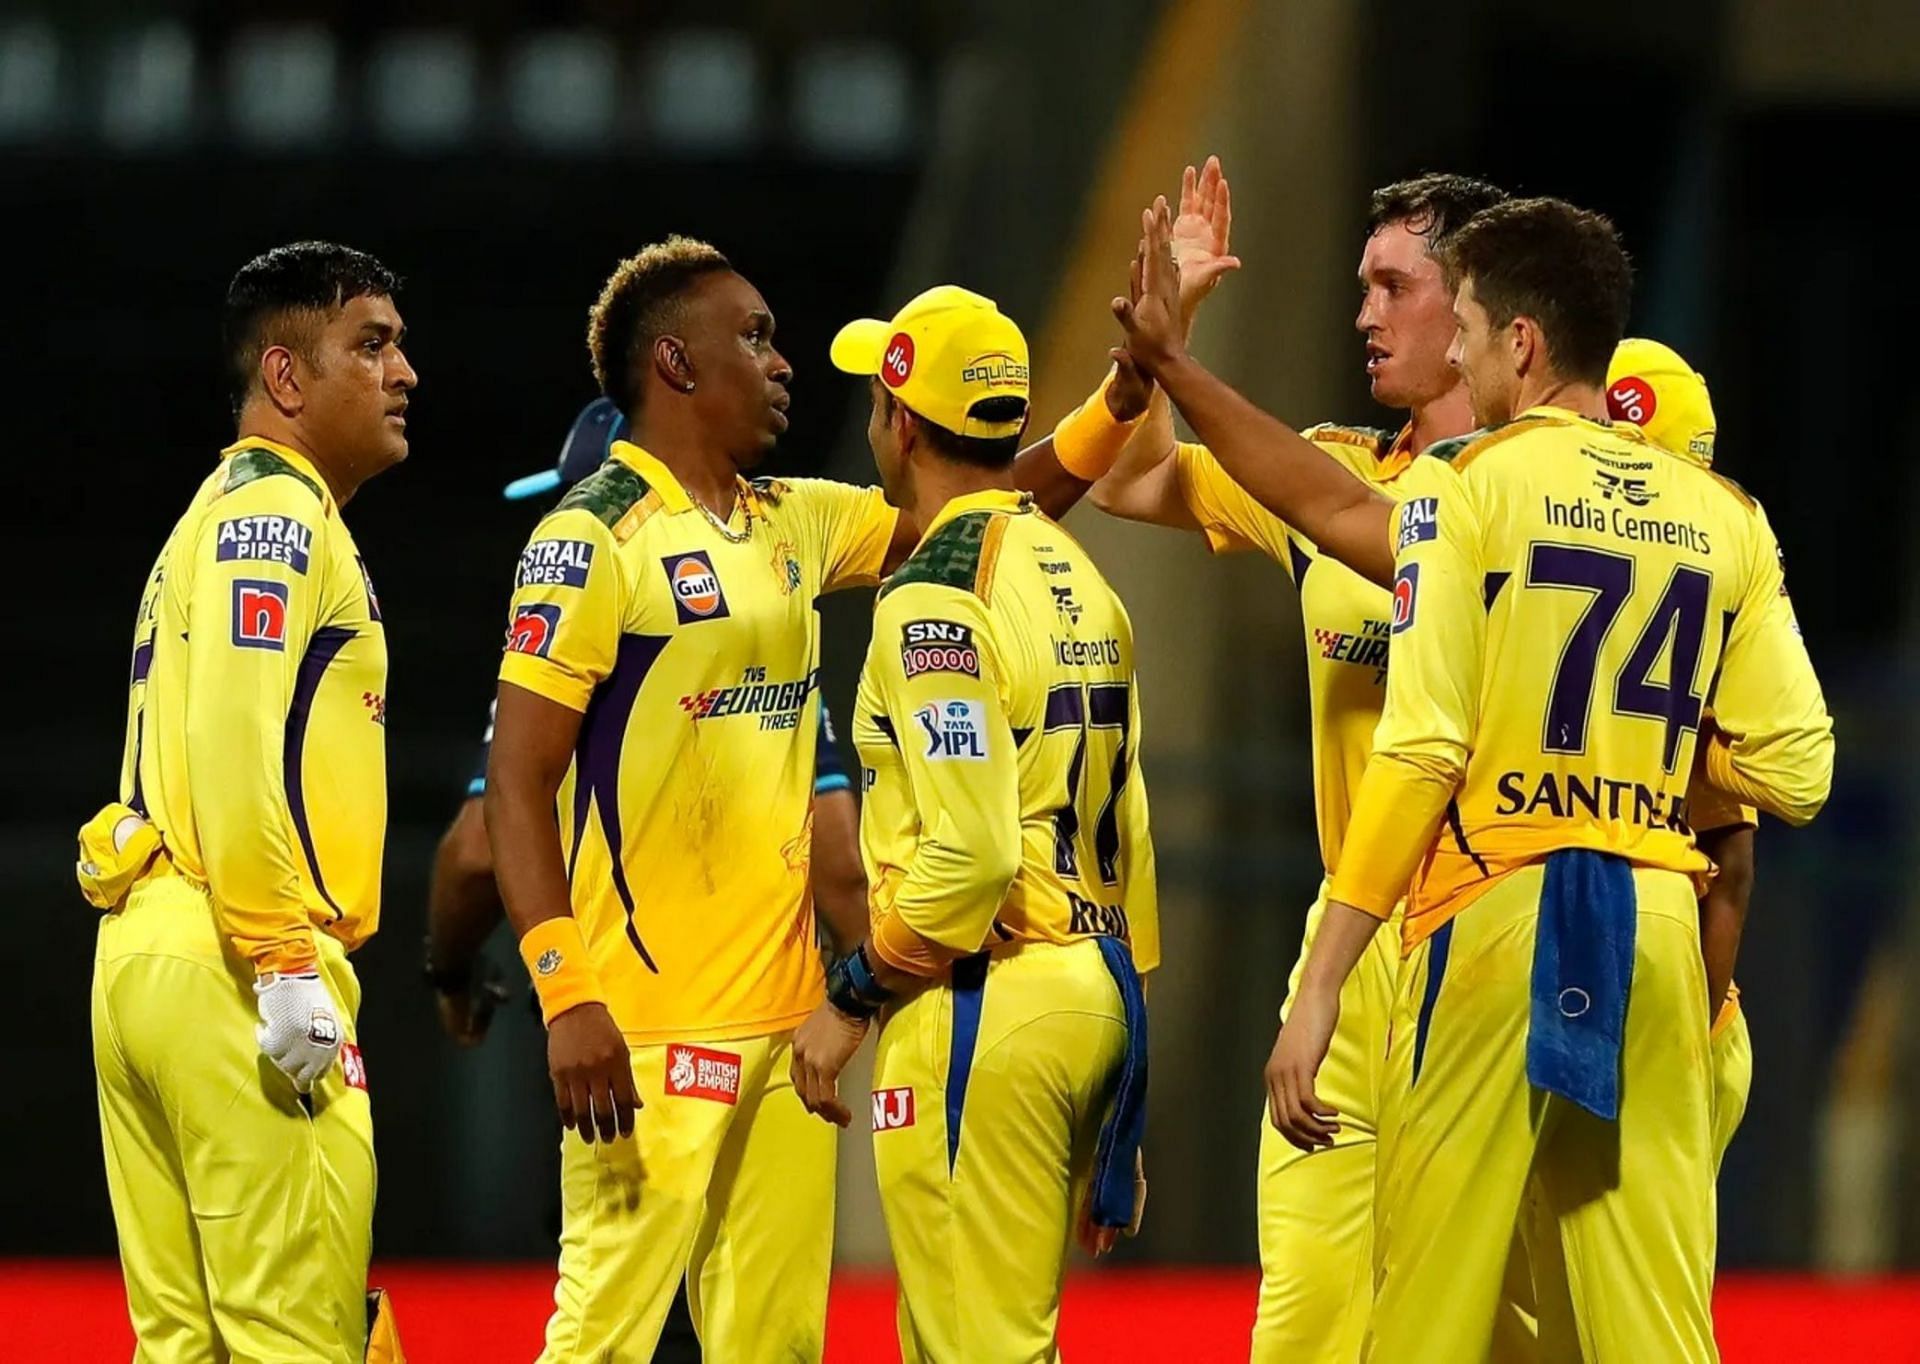 Chennai Super Kings will look to turn the tide in their favour before it is too late